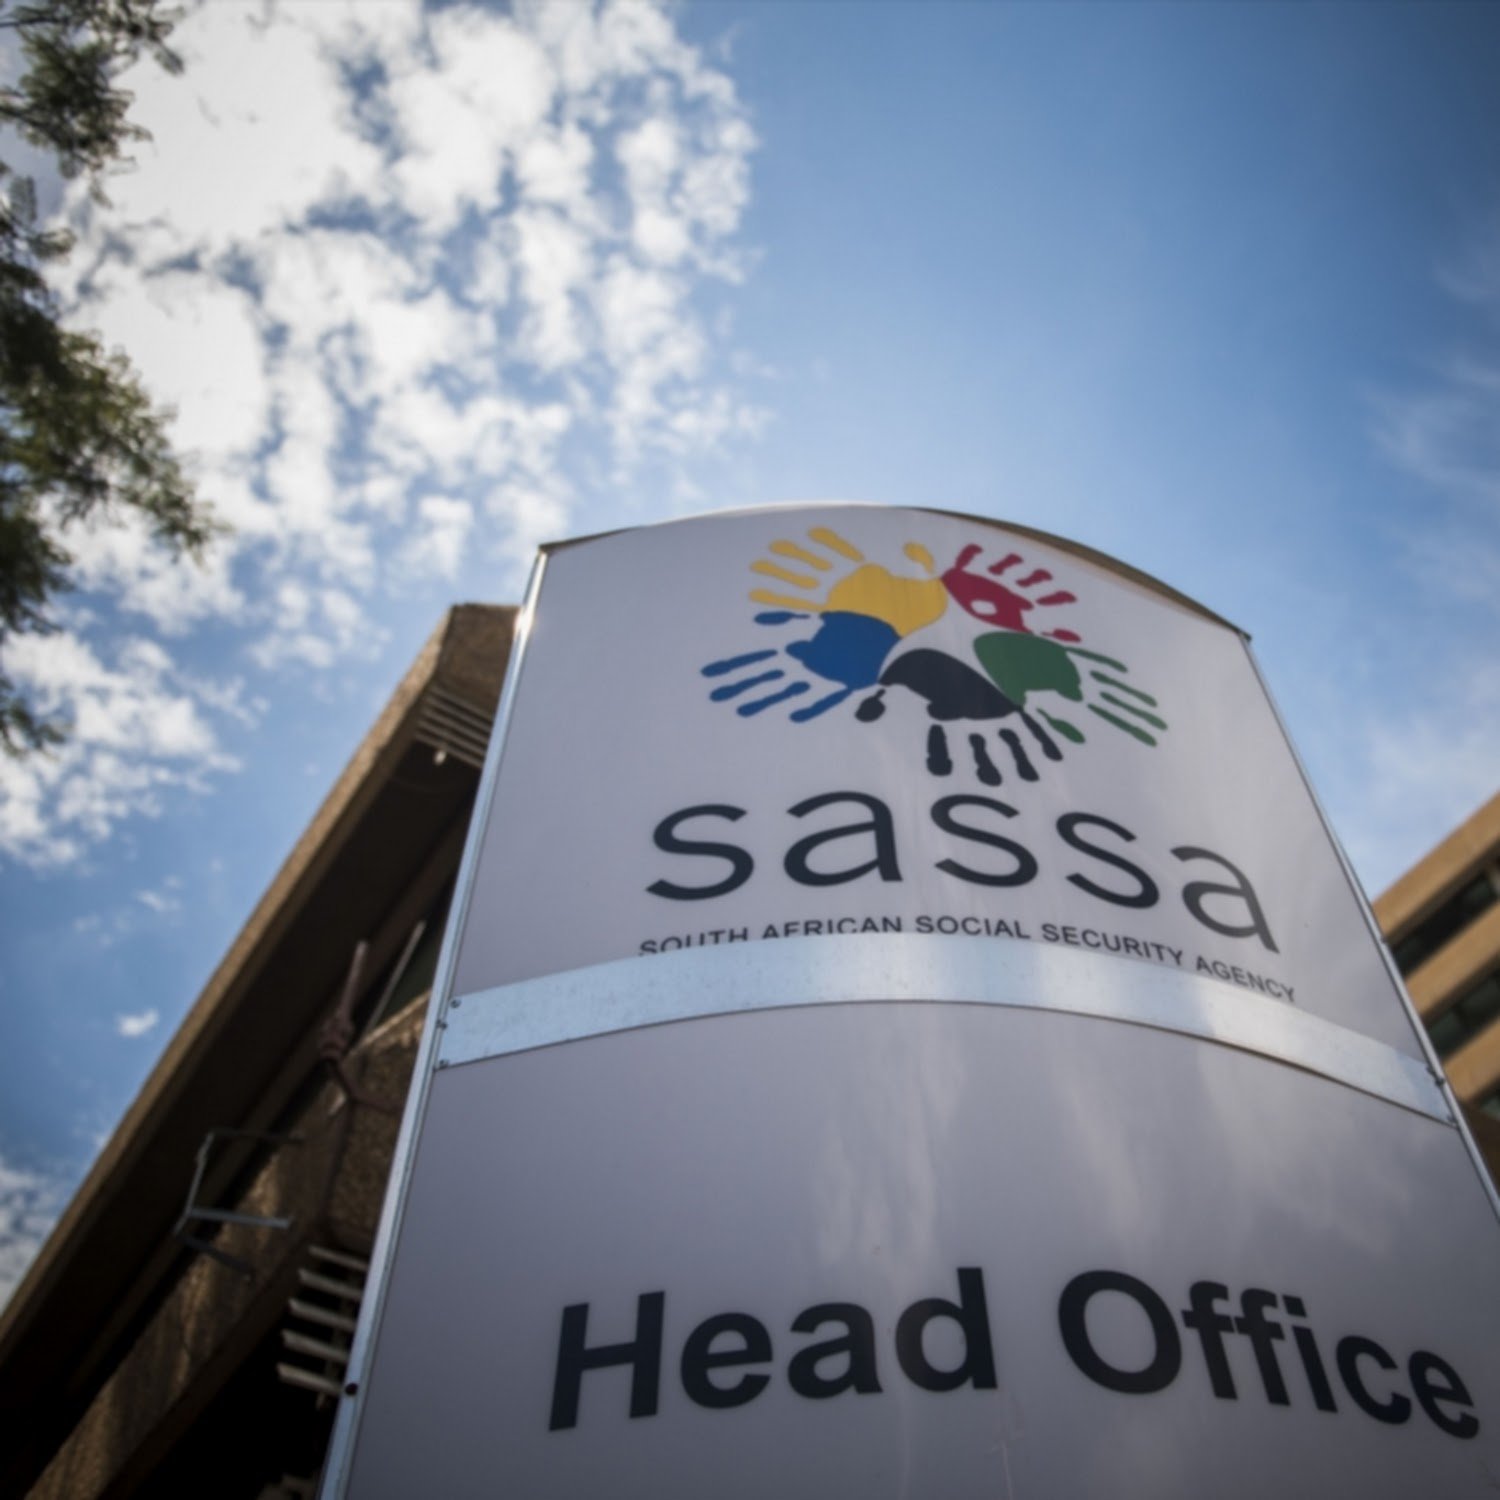 How to apply for Sassa unemployment grant